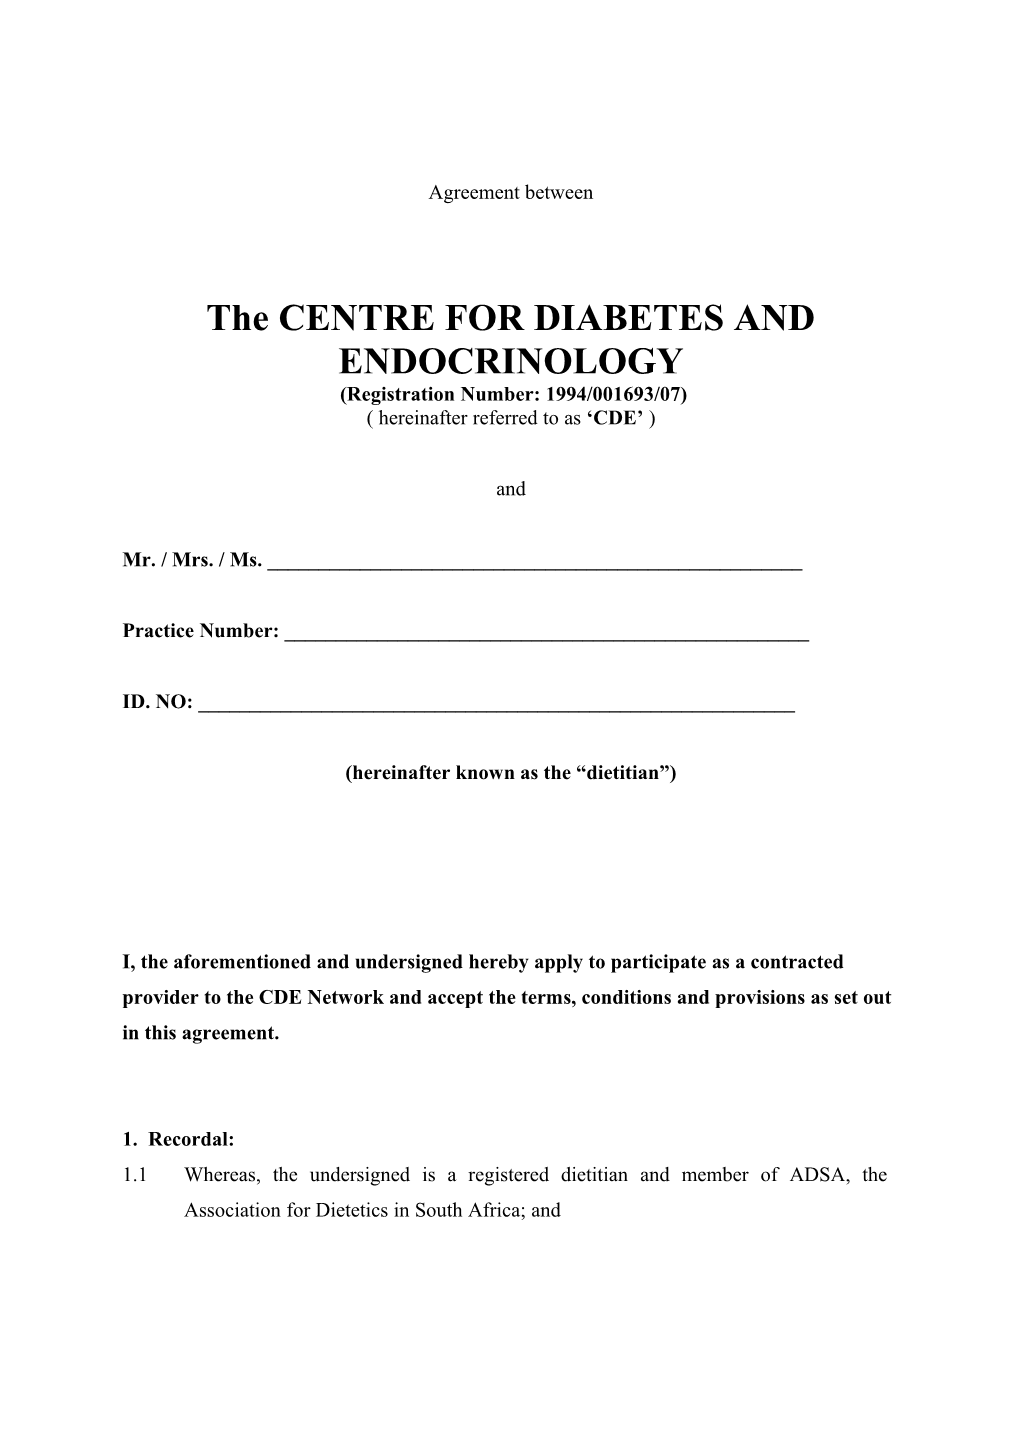 The CENTRE for DIABETES and ENDOCRINOLOGY